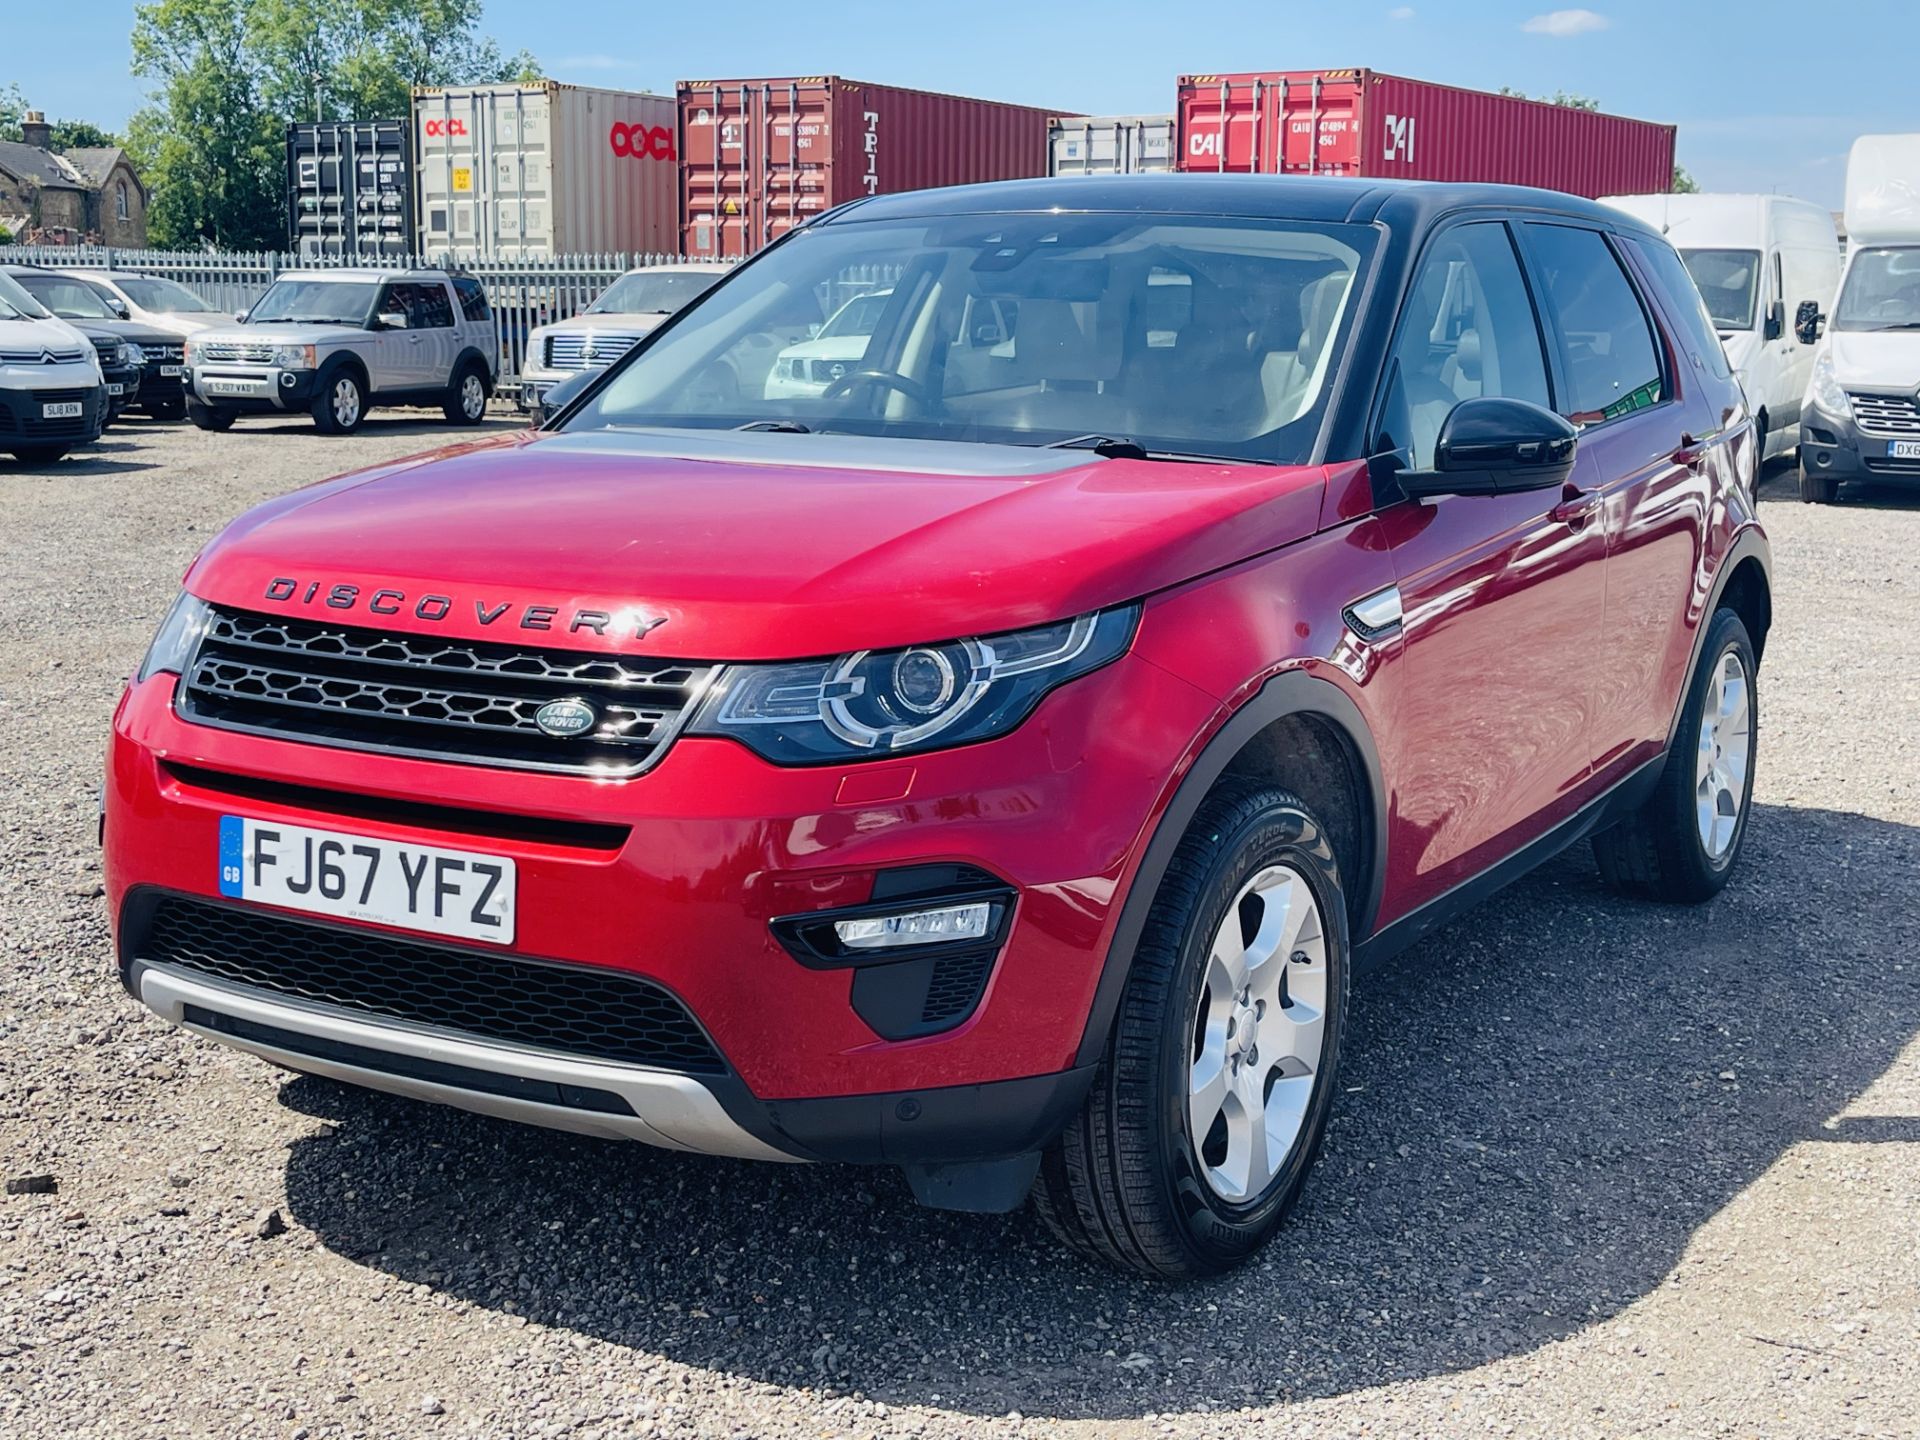 ** ON SALE ** Land Rover Discovery Sport HSE 2.0 ED4 2017 '67 Reg' Sat Nav - Panoramic Glass Roof - Image 6 of 33